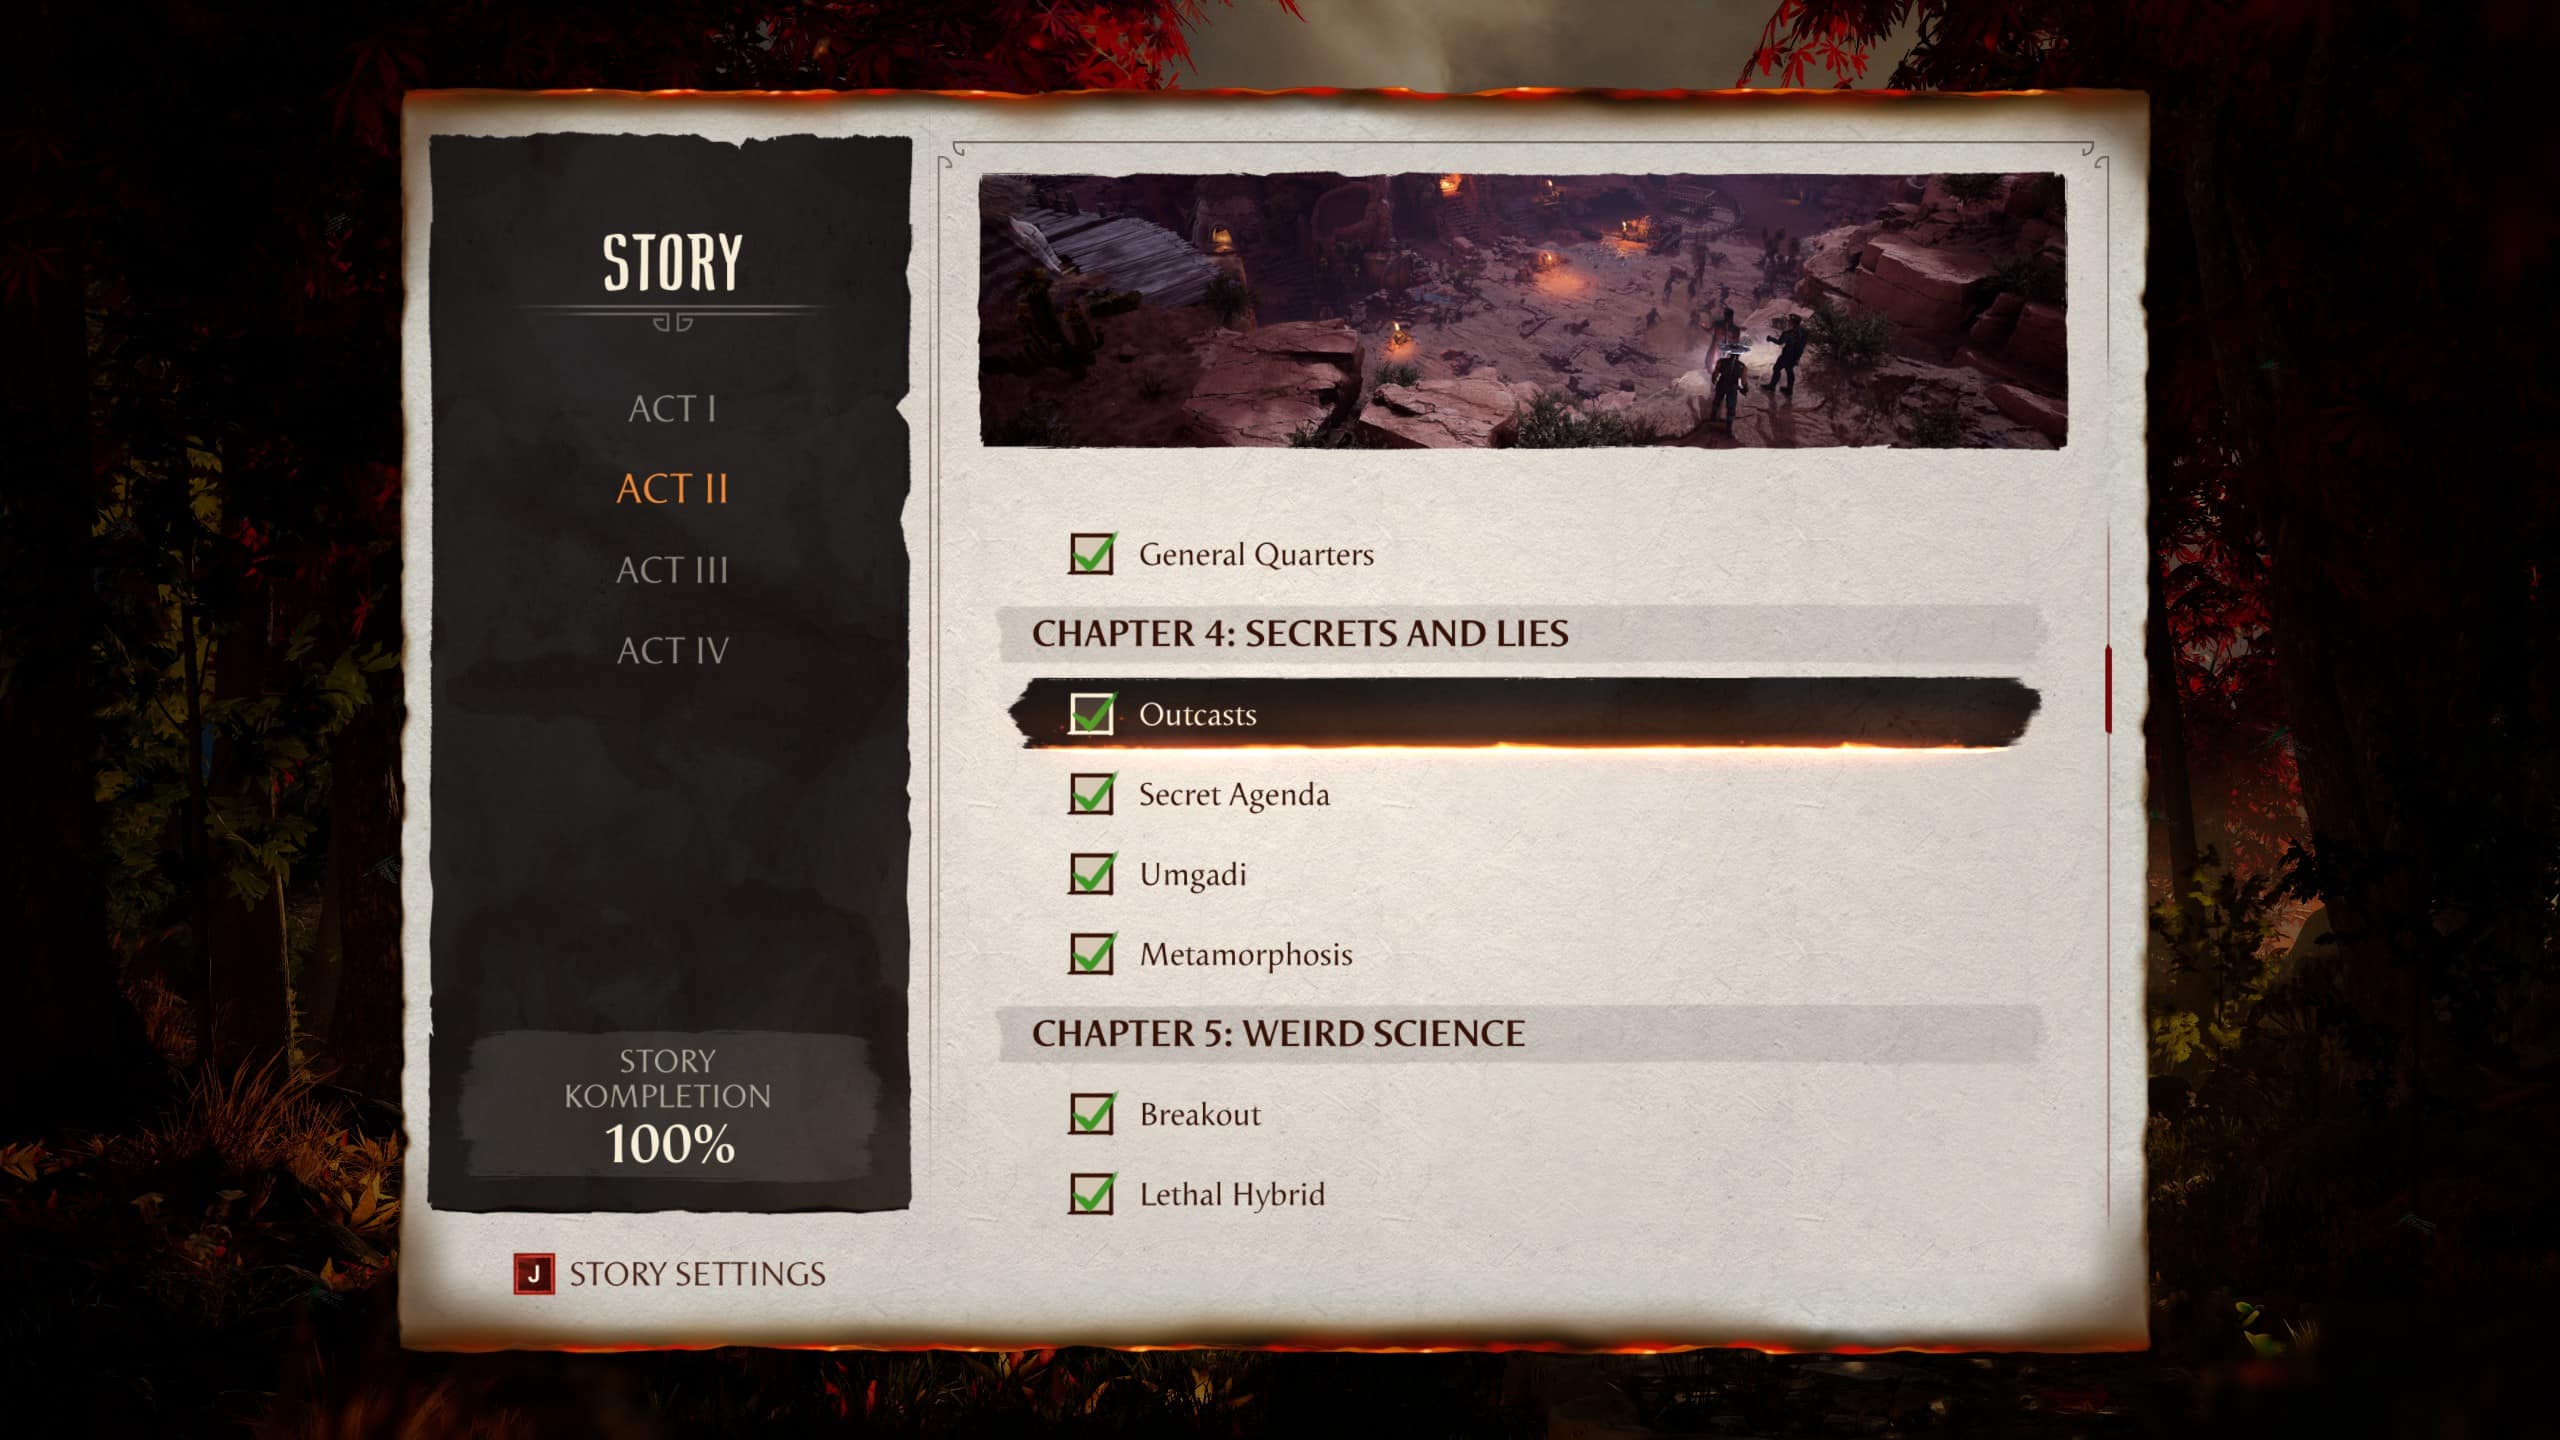 Mortal Kombat 1 chapters: An image of the in-game campaign menu with the second act highlighted.